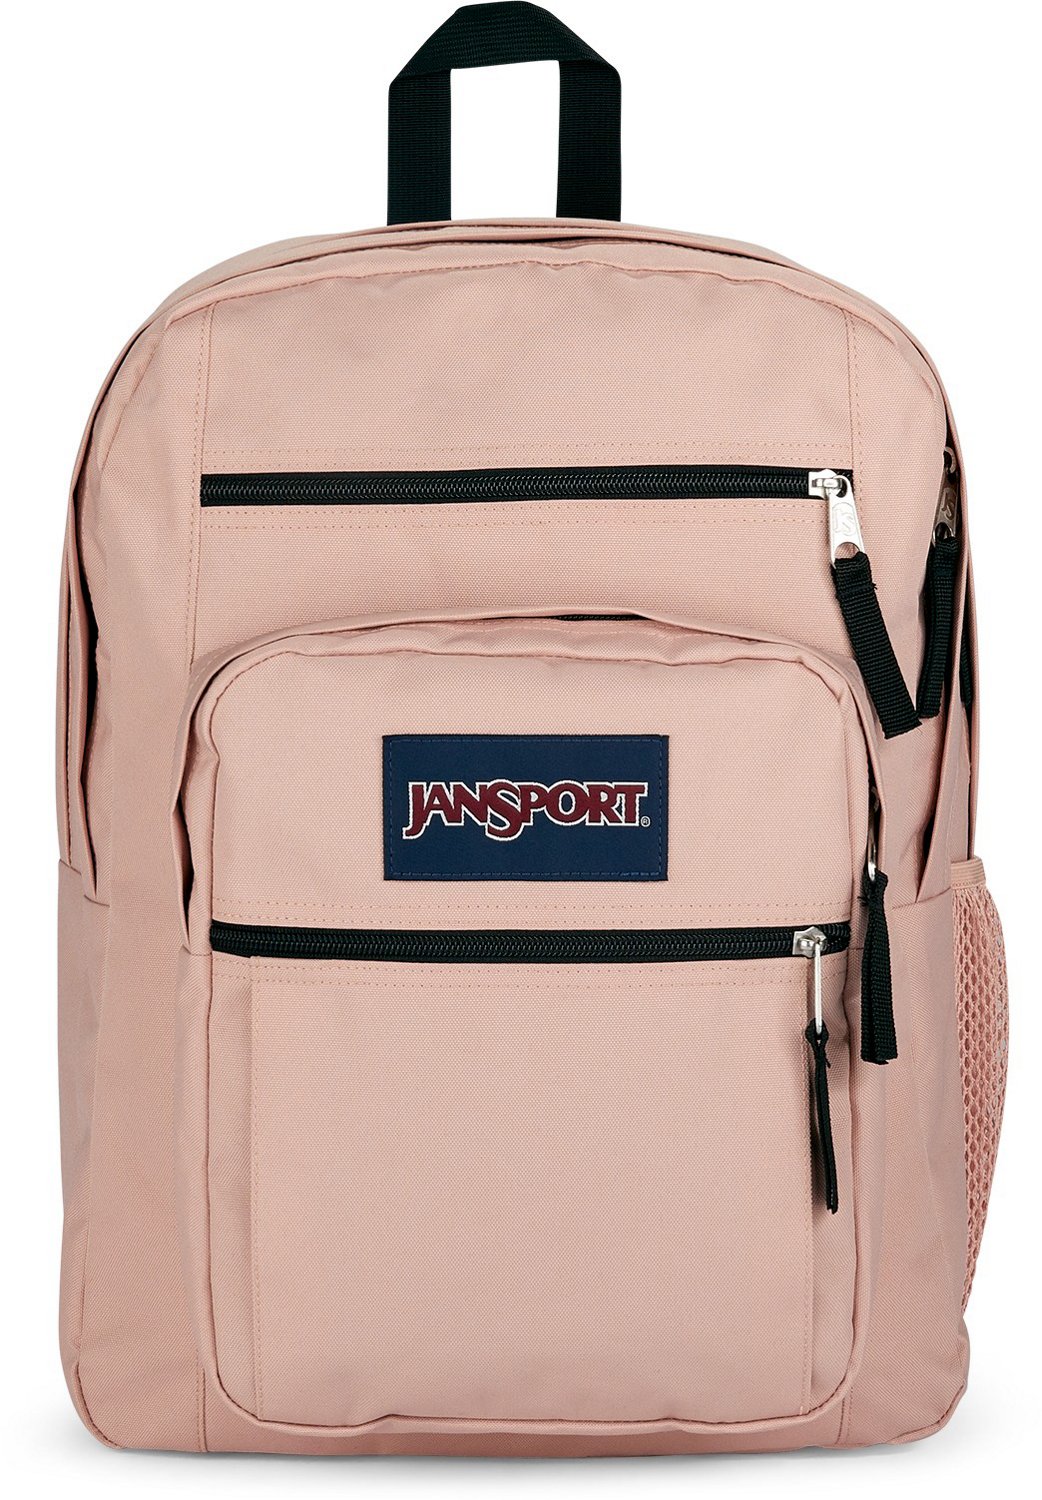 JanSport Big Student Backpack | Free Shipping at Academy